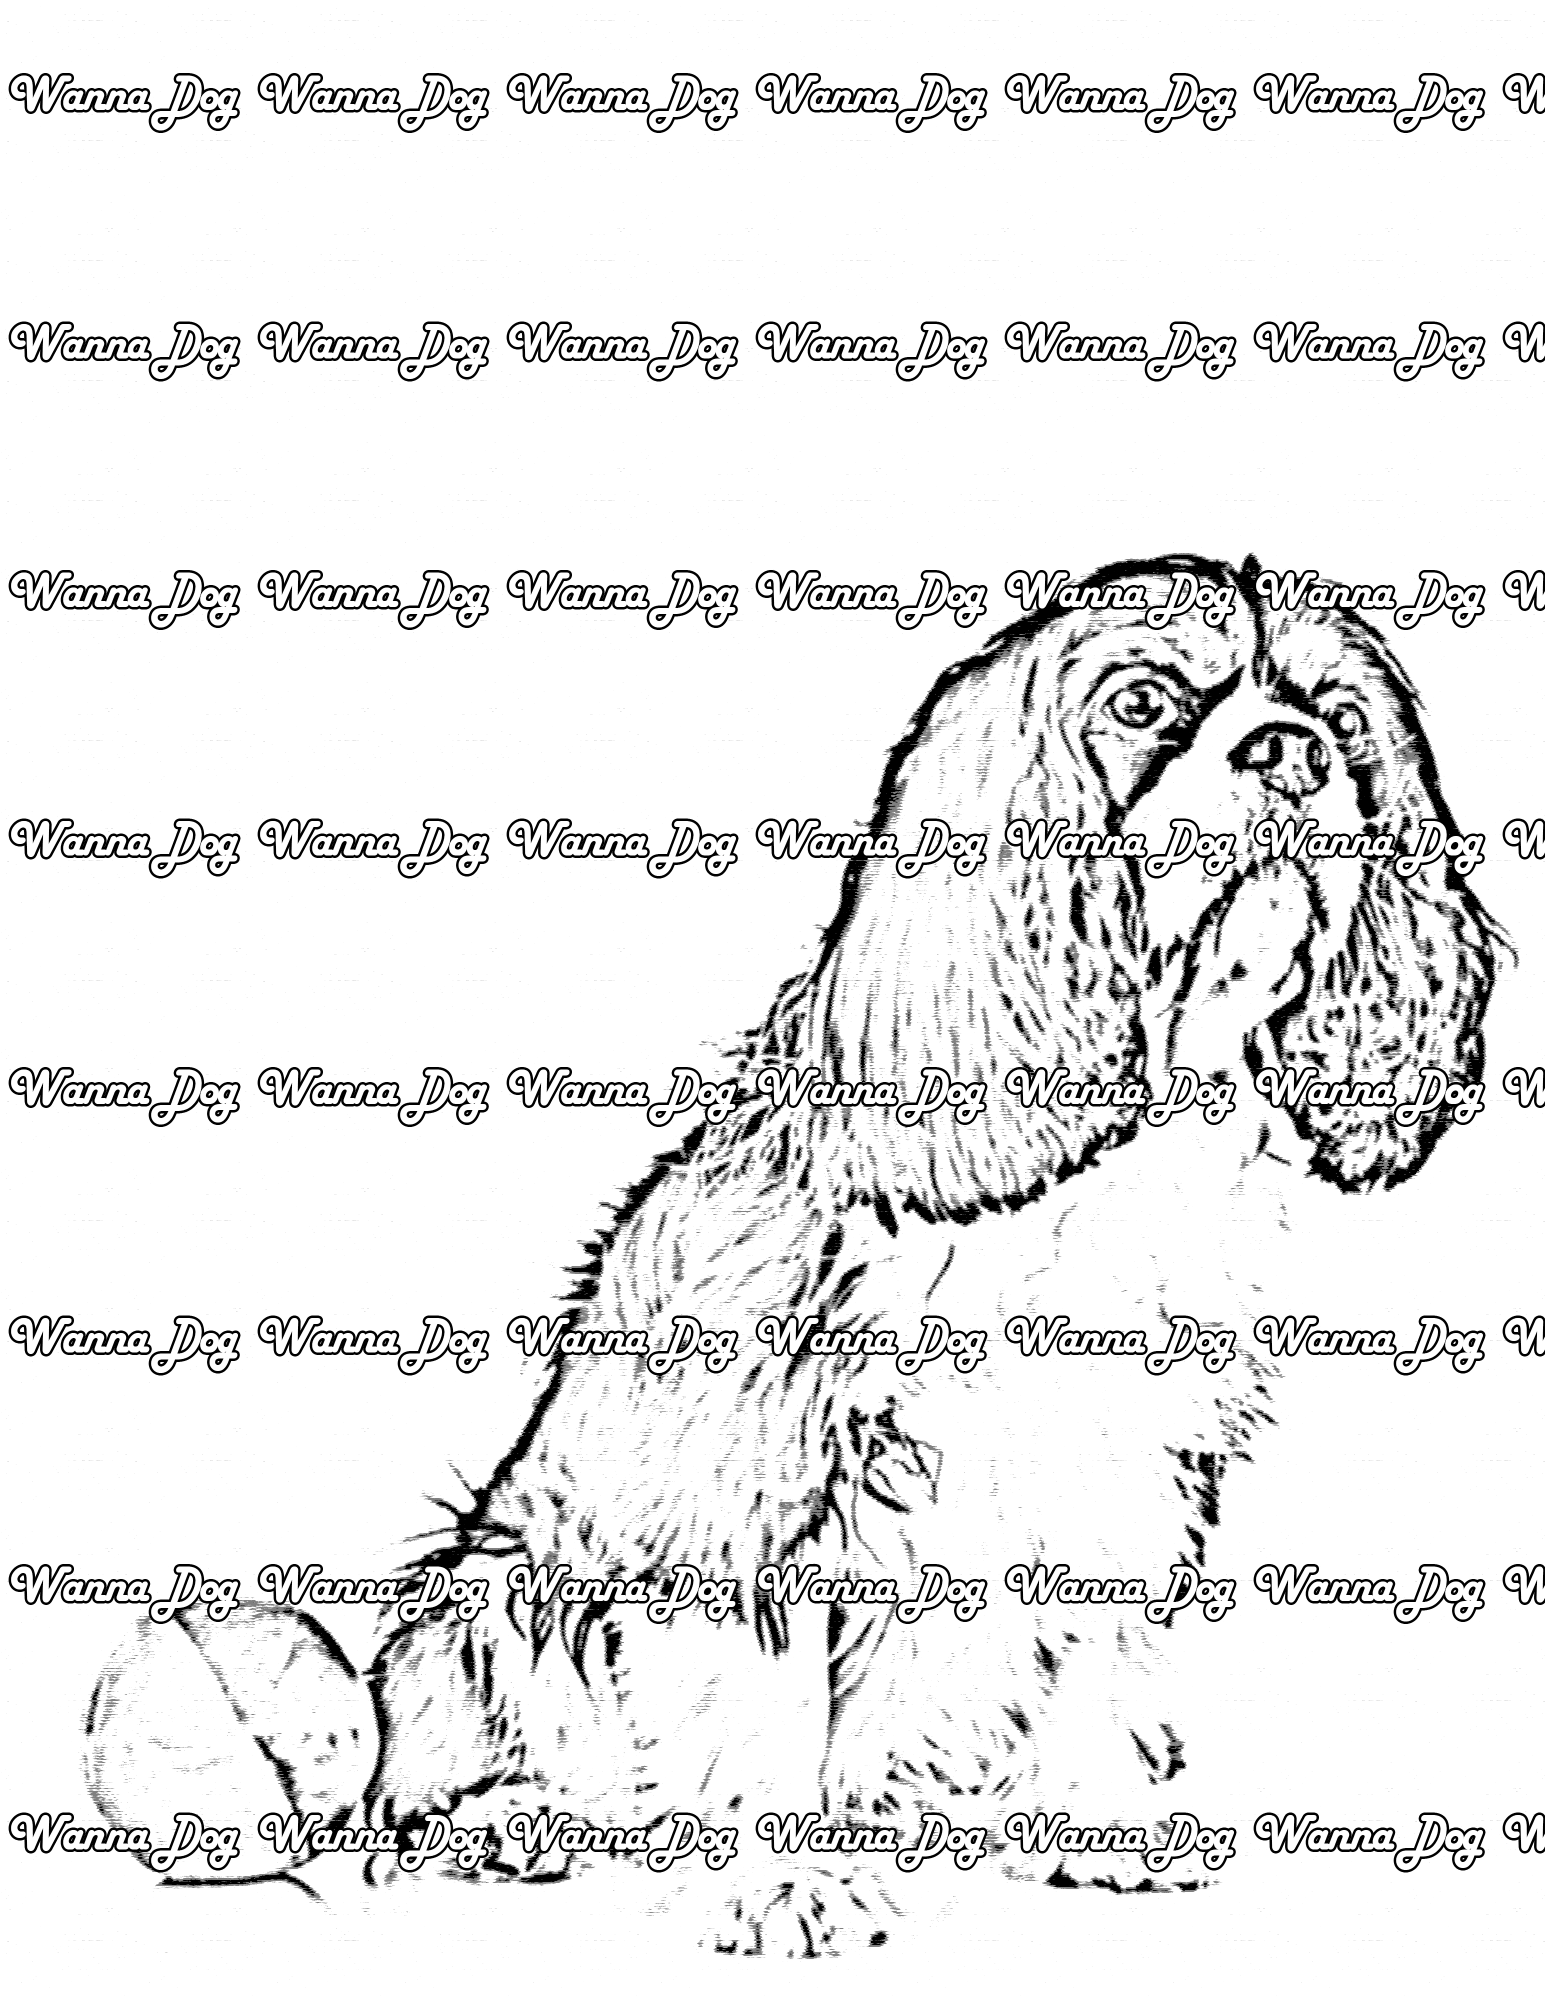 Cavalier King Charles Spaniel Coloring Page of a Cavalier King Charles Spaniel with a beach ball